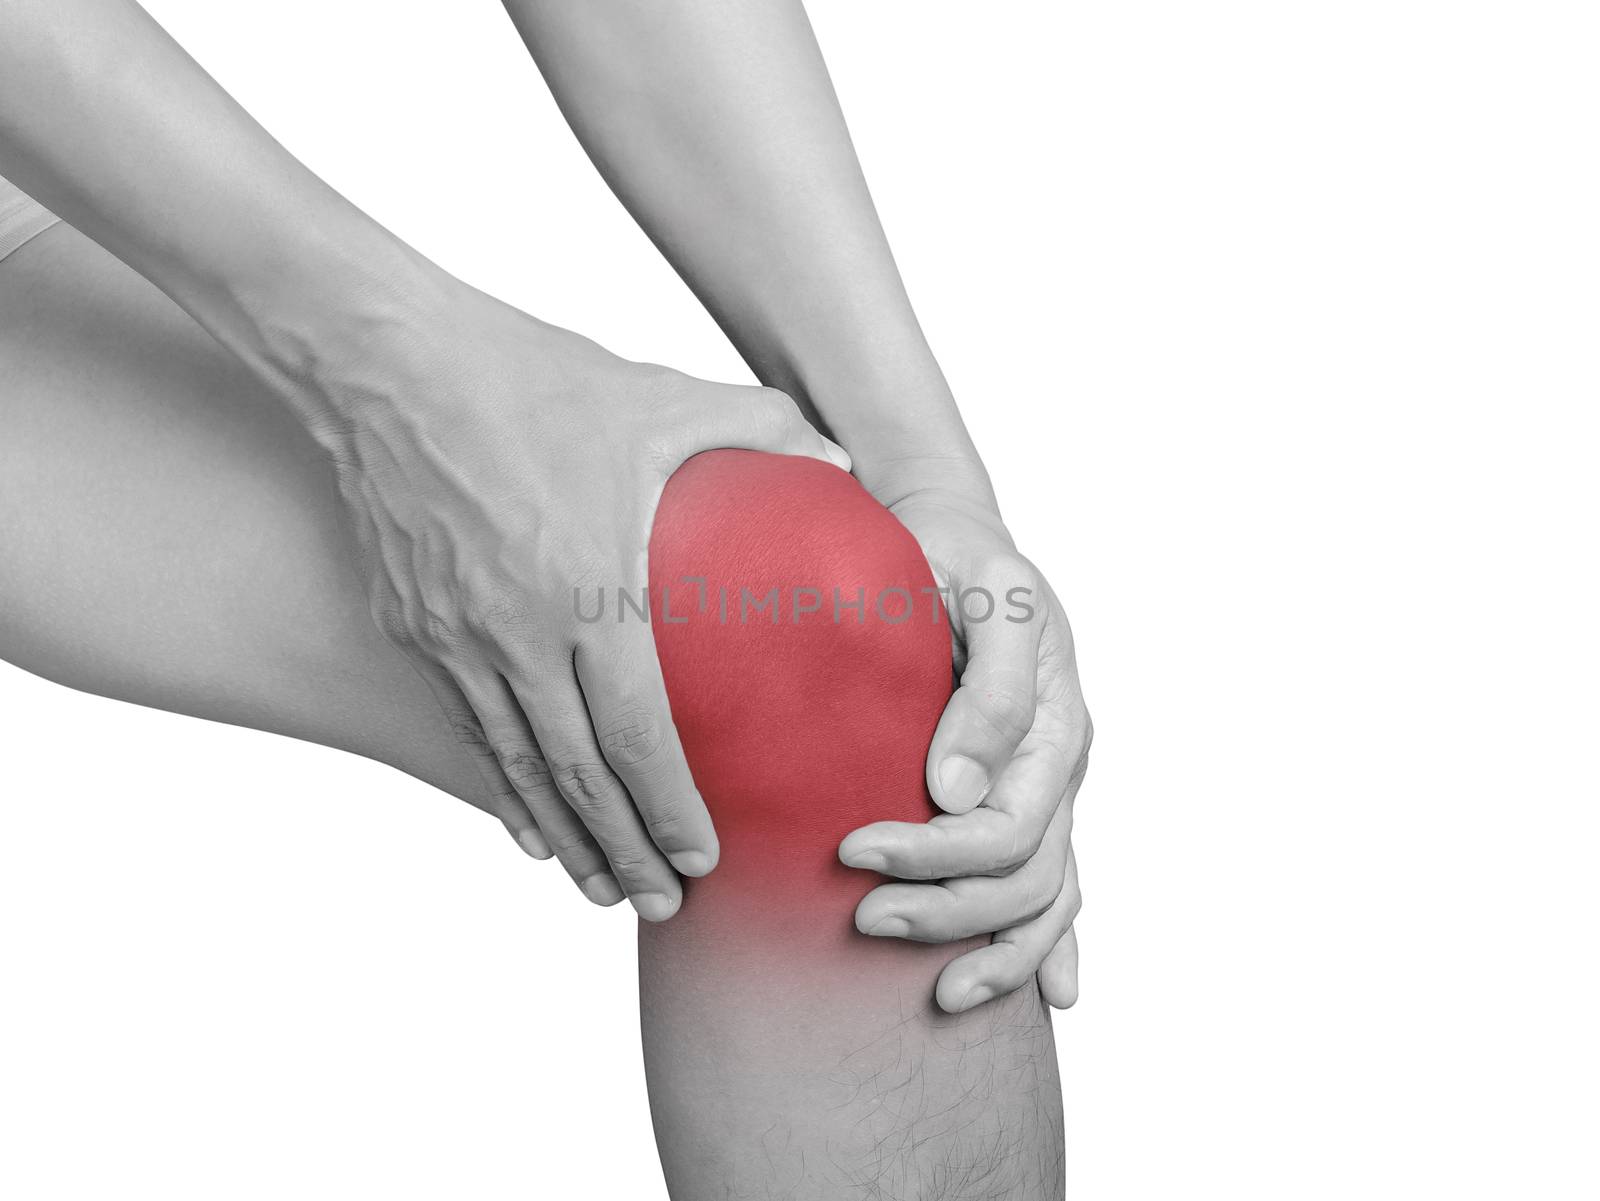 man suffering from knee pain, joint pains. mono tone highlight at knee isolated on white background. health care and medical concept